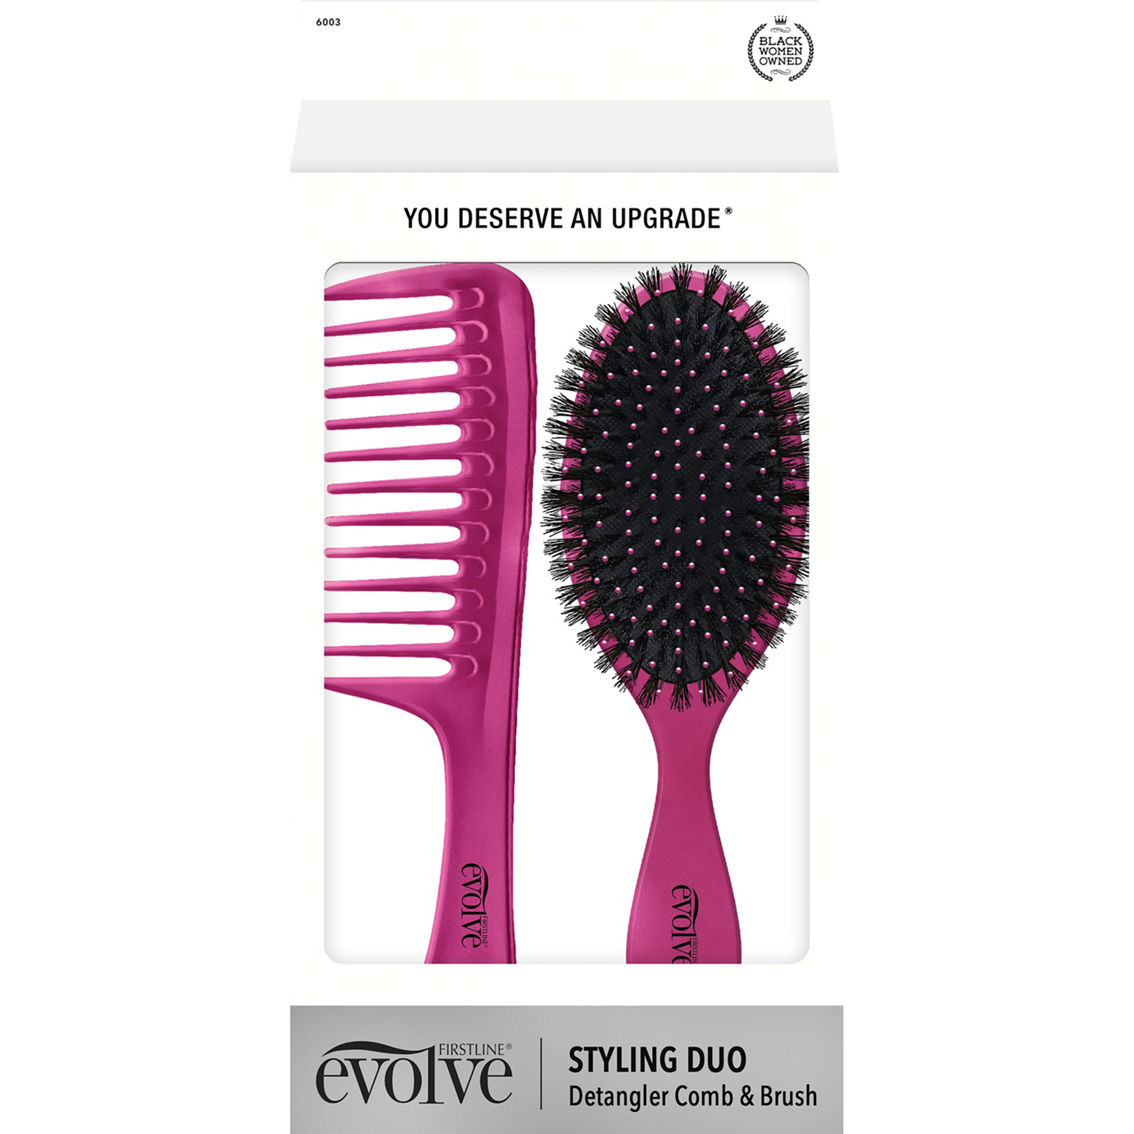 Evolve Styling Duo Comb and Brush Set - Image 2 of 2